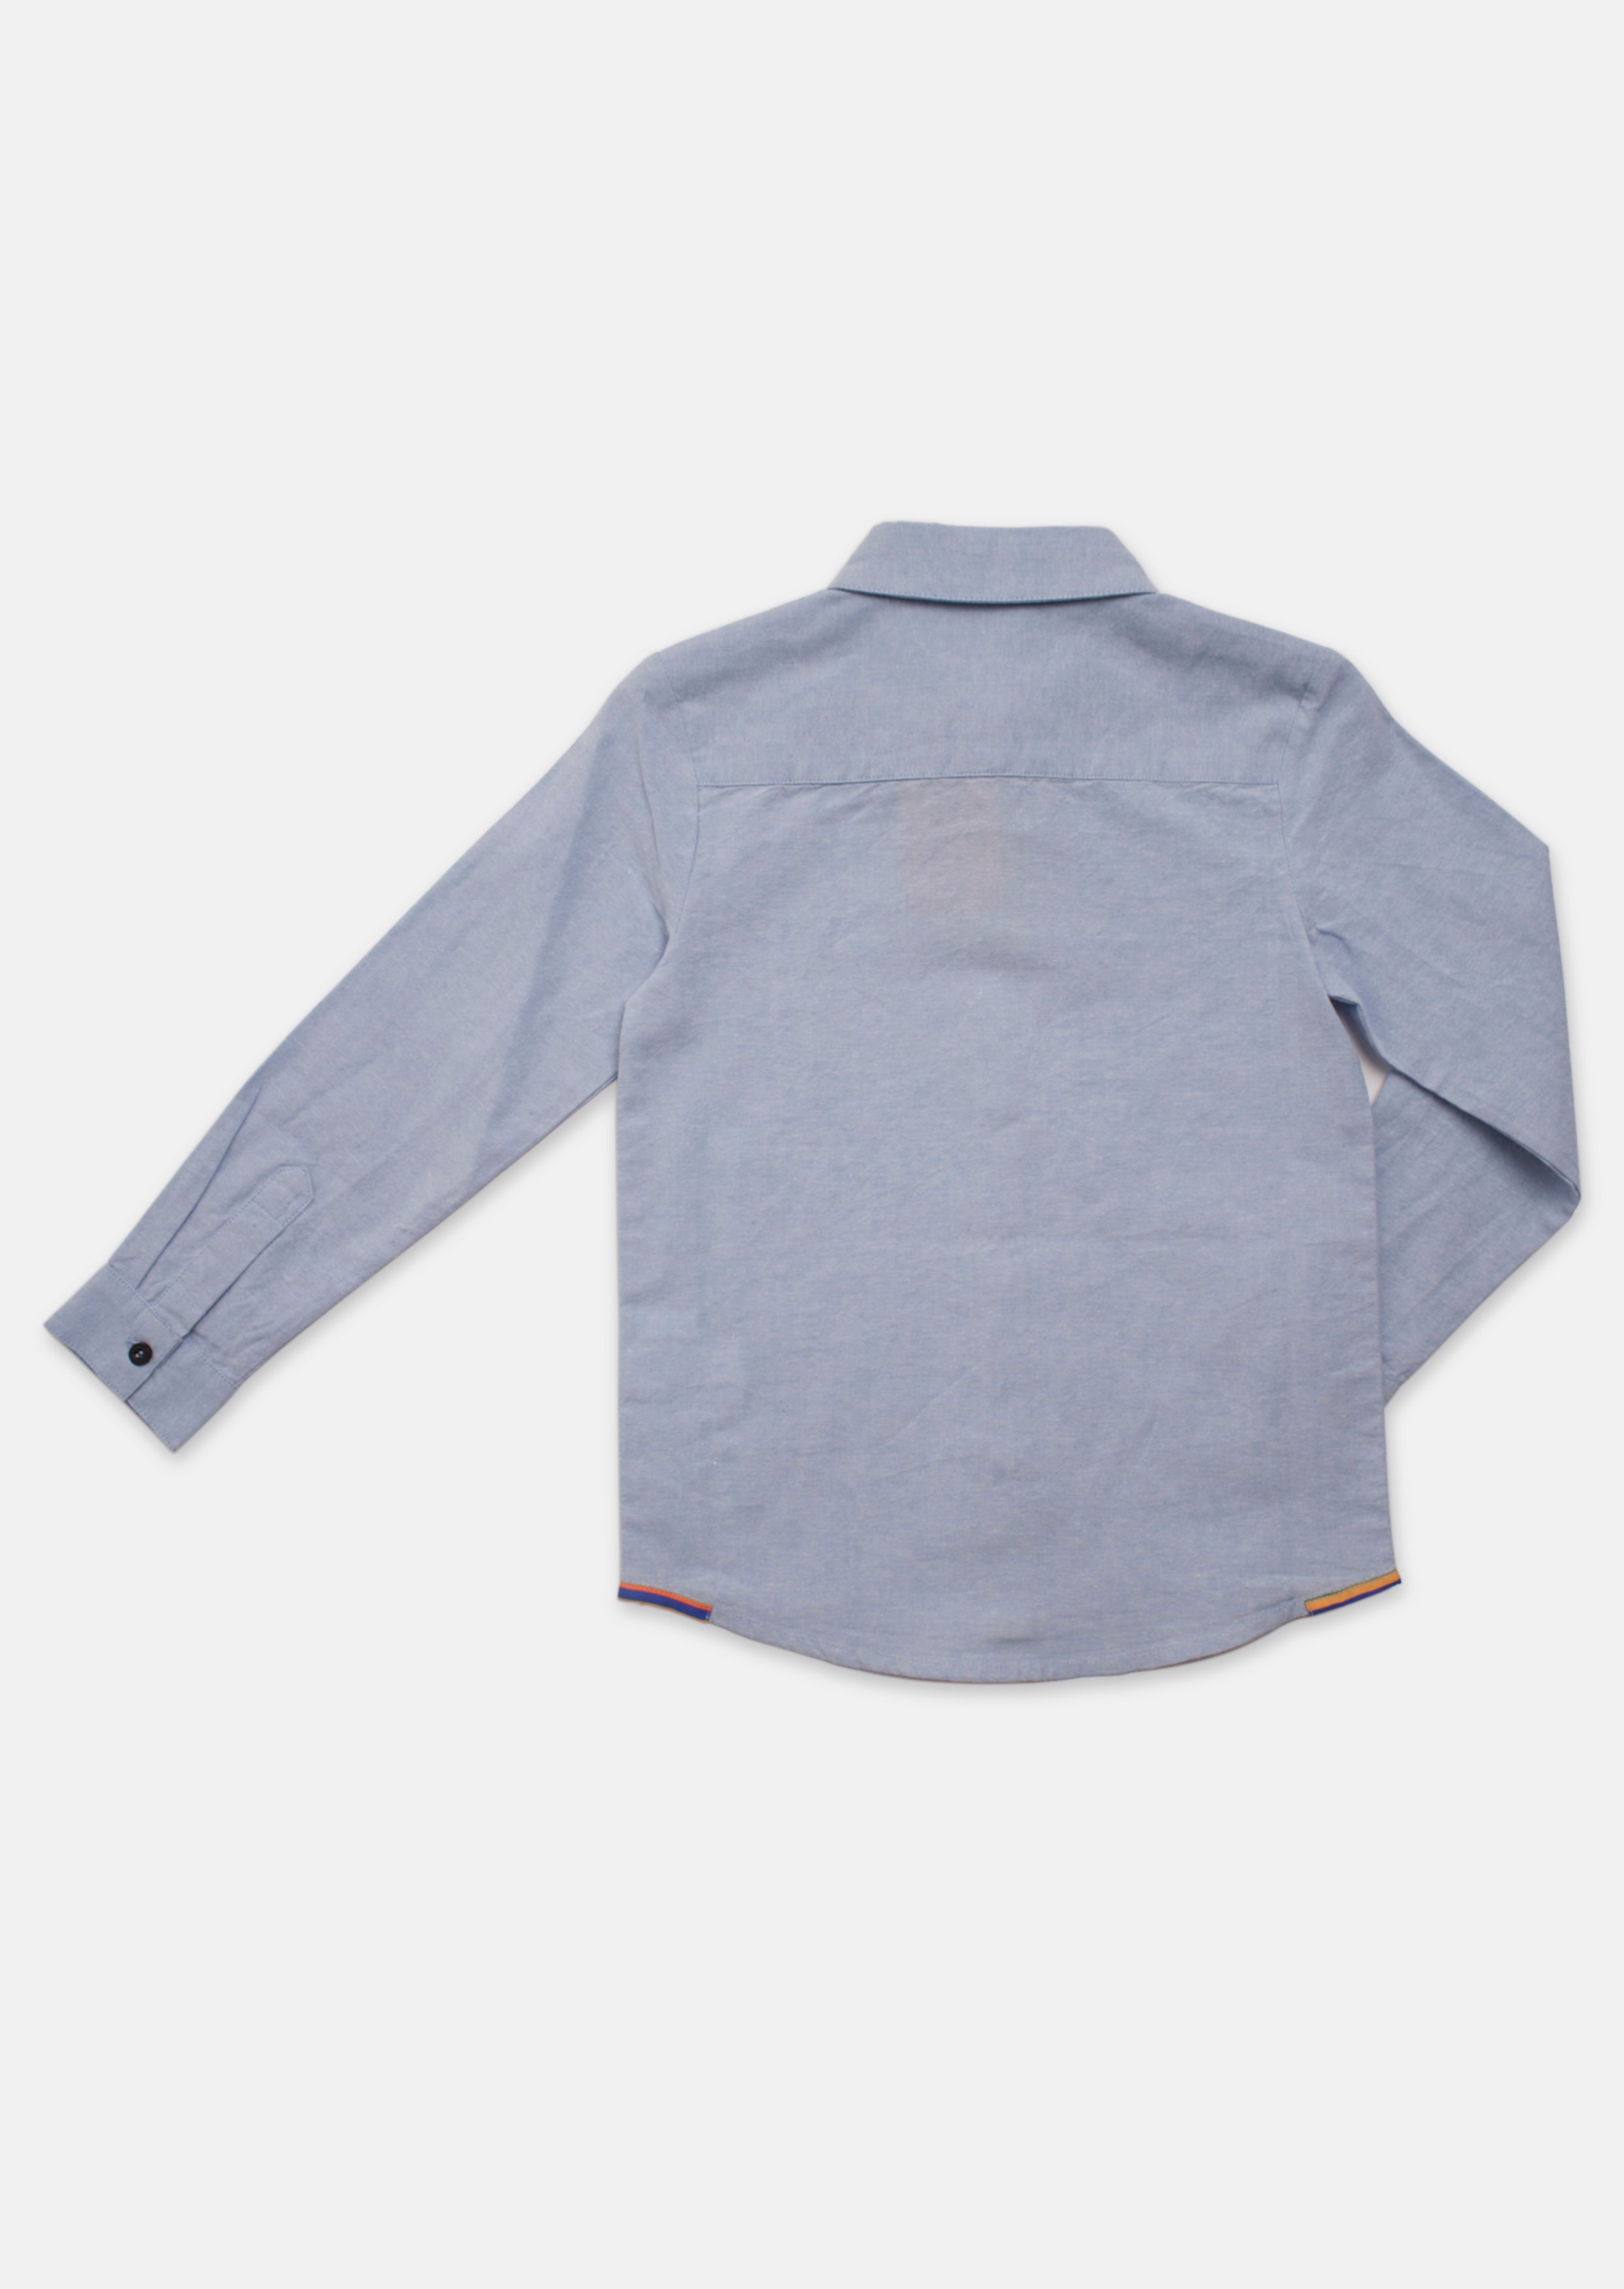 Boys Full Sleeves Cotton Solid Blue Shirt